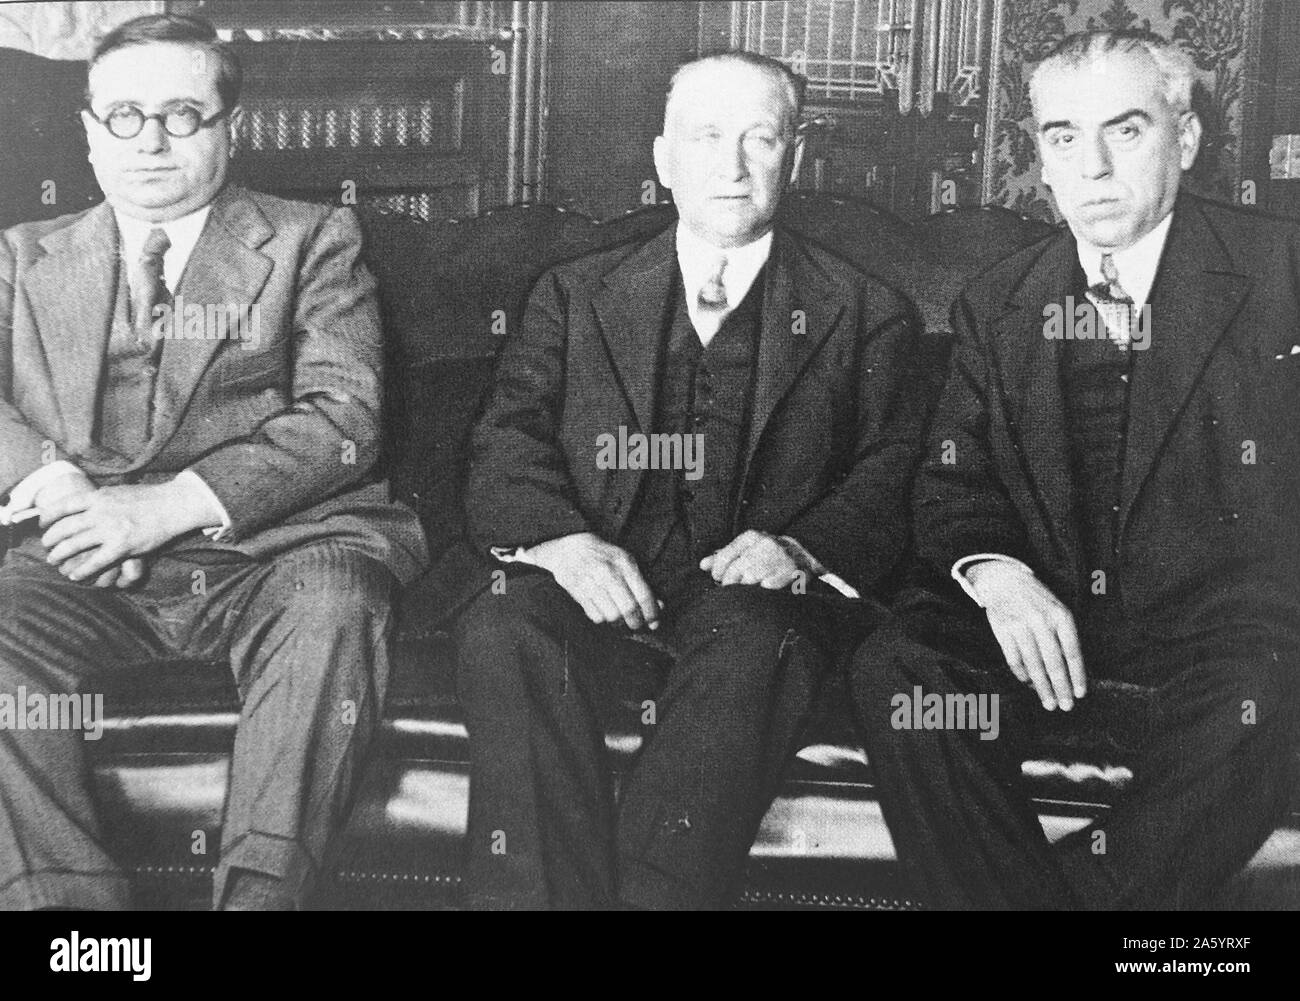 Left to right Spanish socialist politicians: Araquistáin Luis Quevedo, largo caballero and Antoni Fabra i Ribas. Araquistáin Luis Quevedo (1886 - 1959) Spanish writer and politician. ambassador to Germany 1932-36. ambassador to France 1936-39. Francisco Largo Caballero (1869 – 1946) Spanish politician and trade unionist. He was one of the historic leaders of the Spanish Socialist Workers' Party (PSOE) and of the Workers' General Union (UGT). In 1936 and 1937 served as the Prime Minister. Antoni Fabra i Ribas (1879 - 1958) Spanish writer and socialist political ideologue. Stock Photo